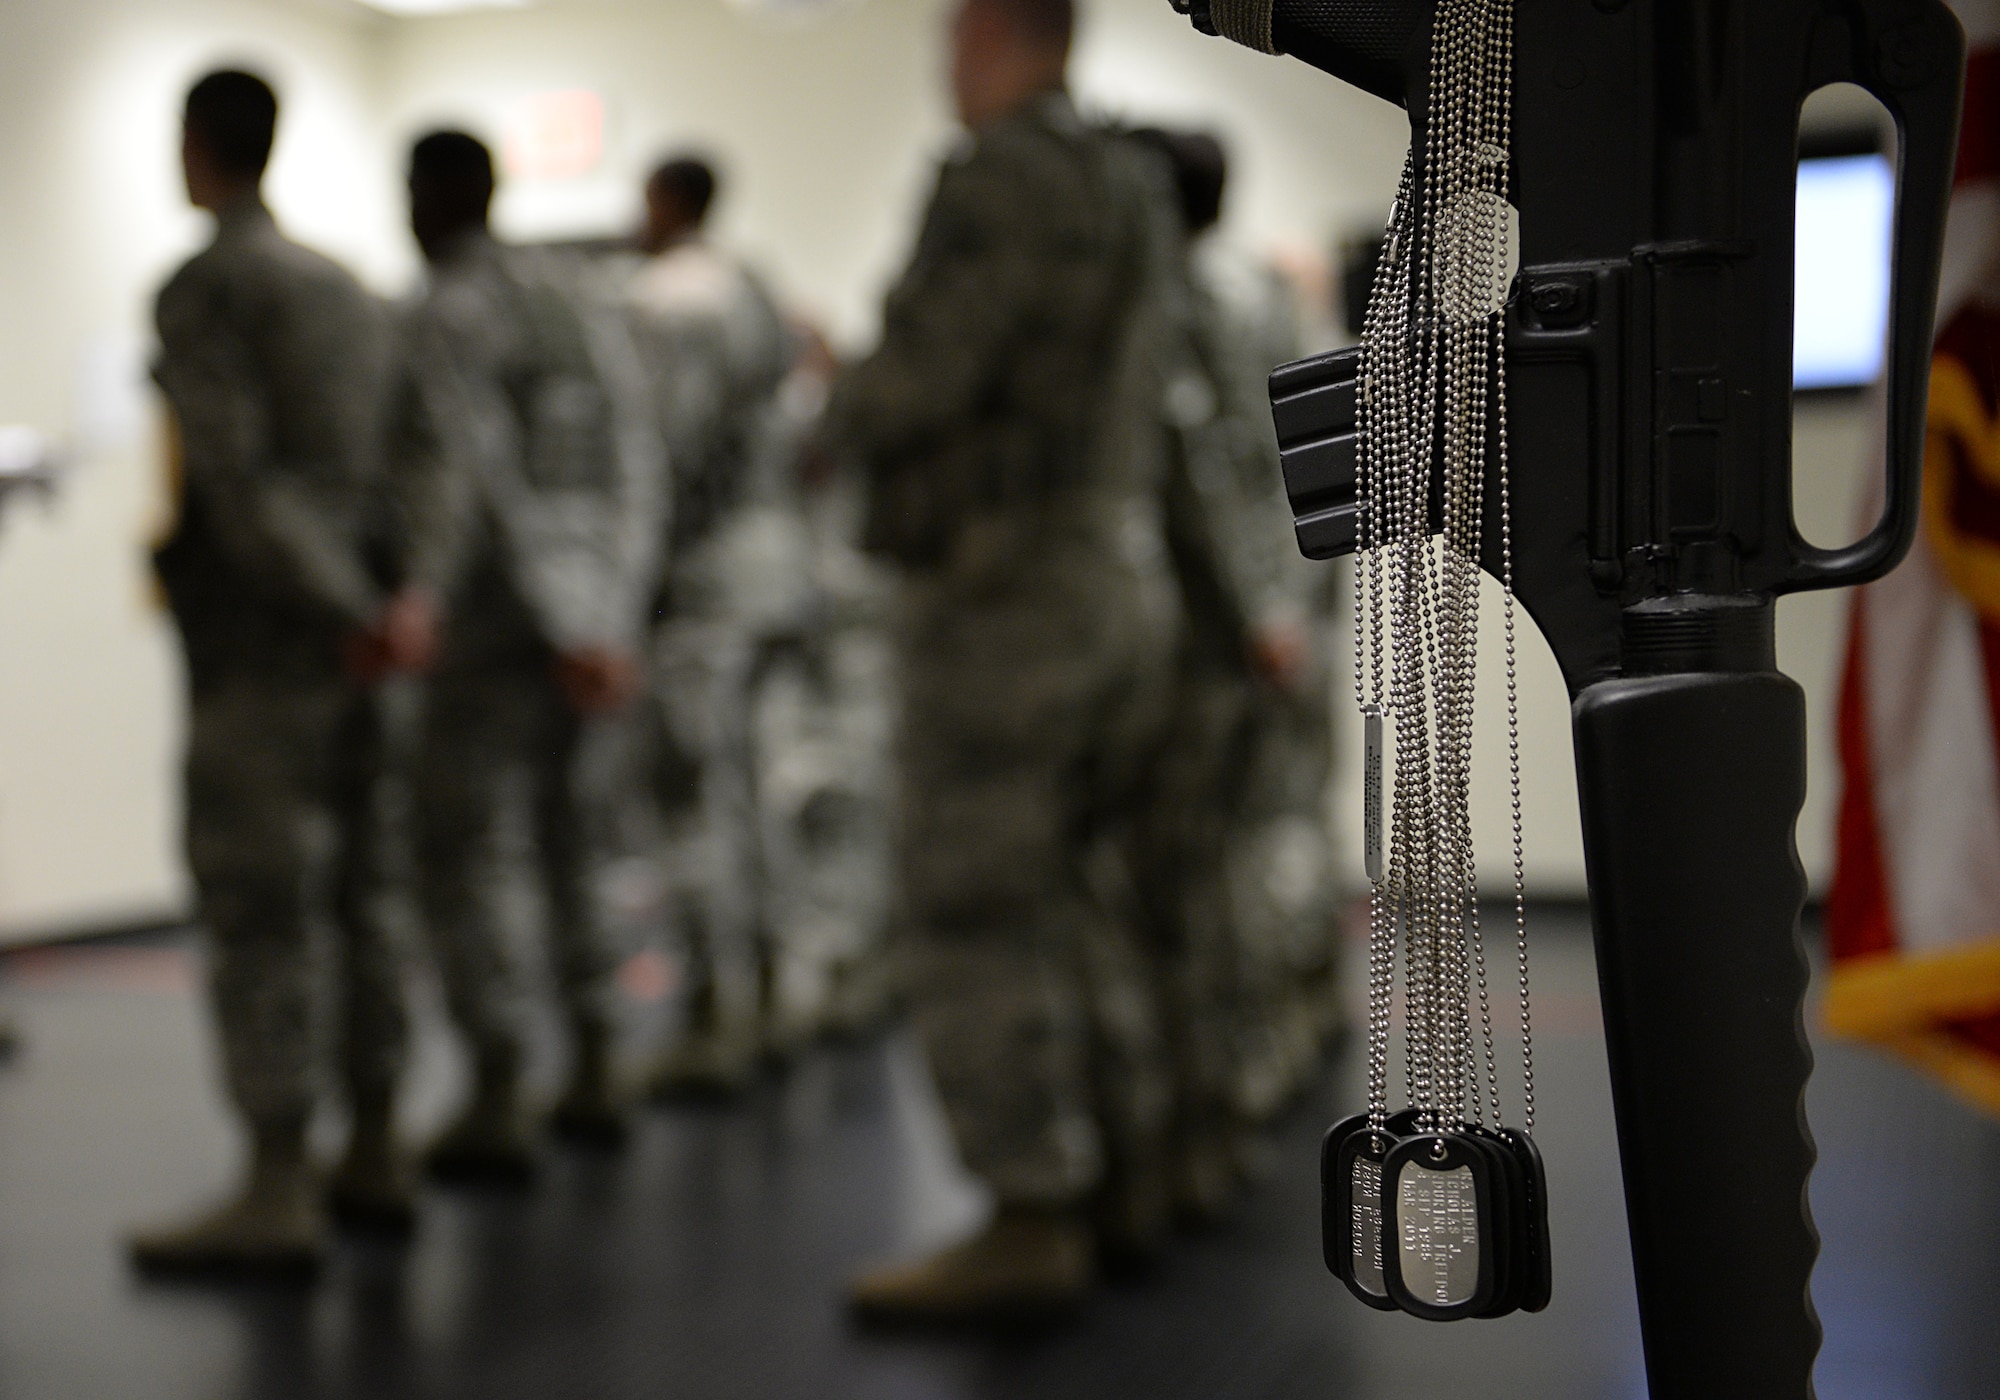 Dog tags representing fallen security forces Airmen hang on a fallen heroes memorial in the guard mount room in the security forces building March 12, 2015, Keesler Air Force Base, Miss. 81st SFS Airmen perform multiple roles to keep members of Keesler safe, ranging from identification checks at base entrances to searching for explosives and narcotics with military working dogs. (U.S. Air Force photo by Senior Airman Holly Mansfield)